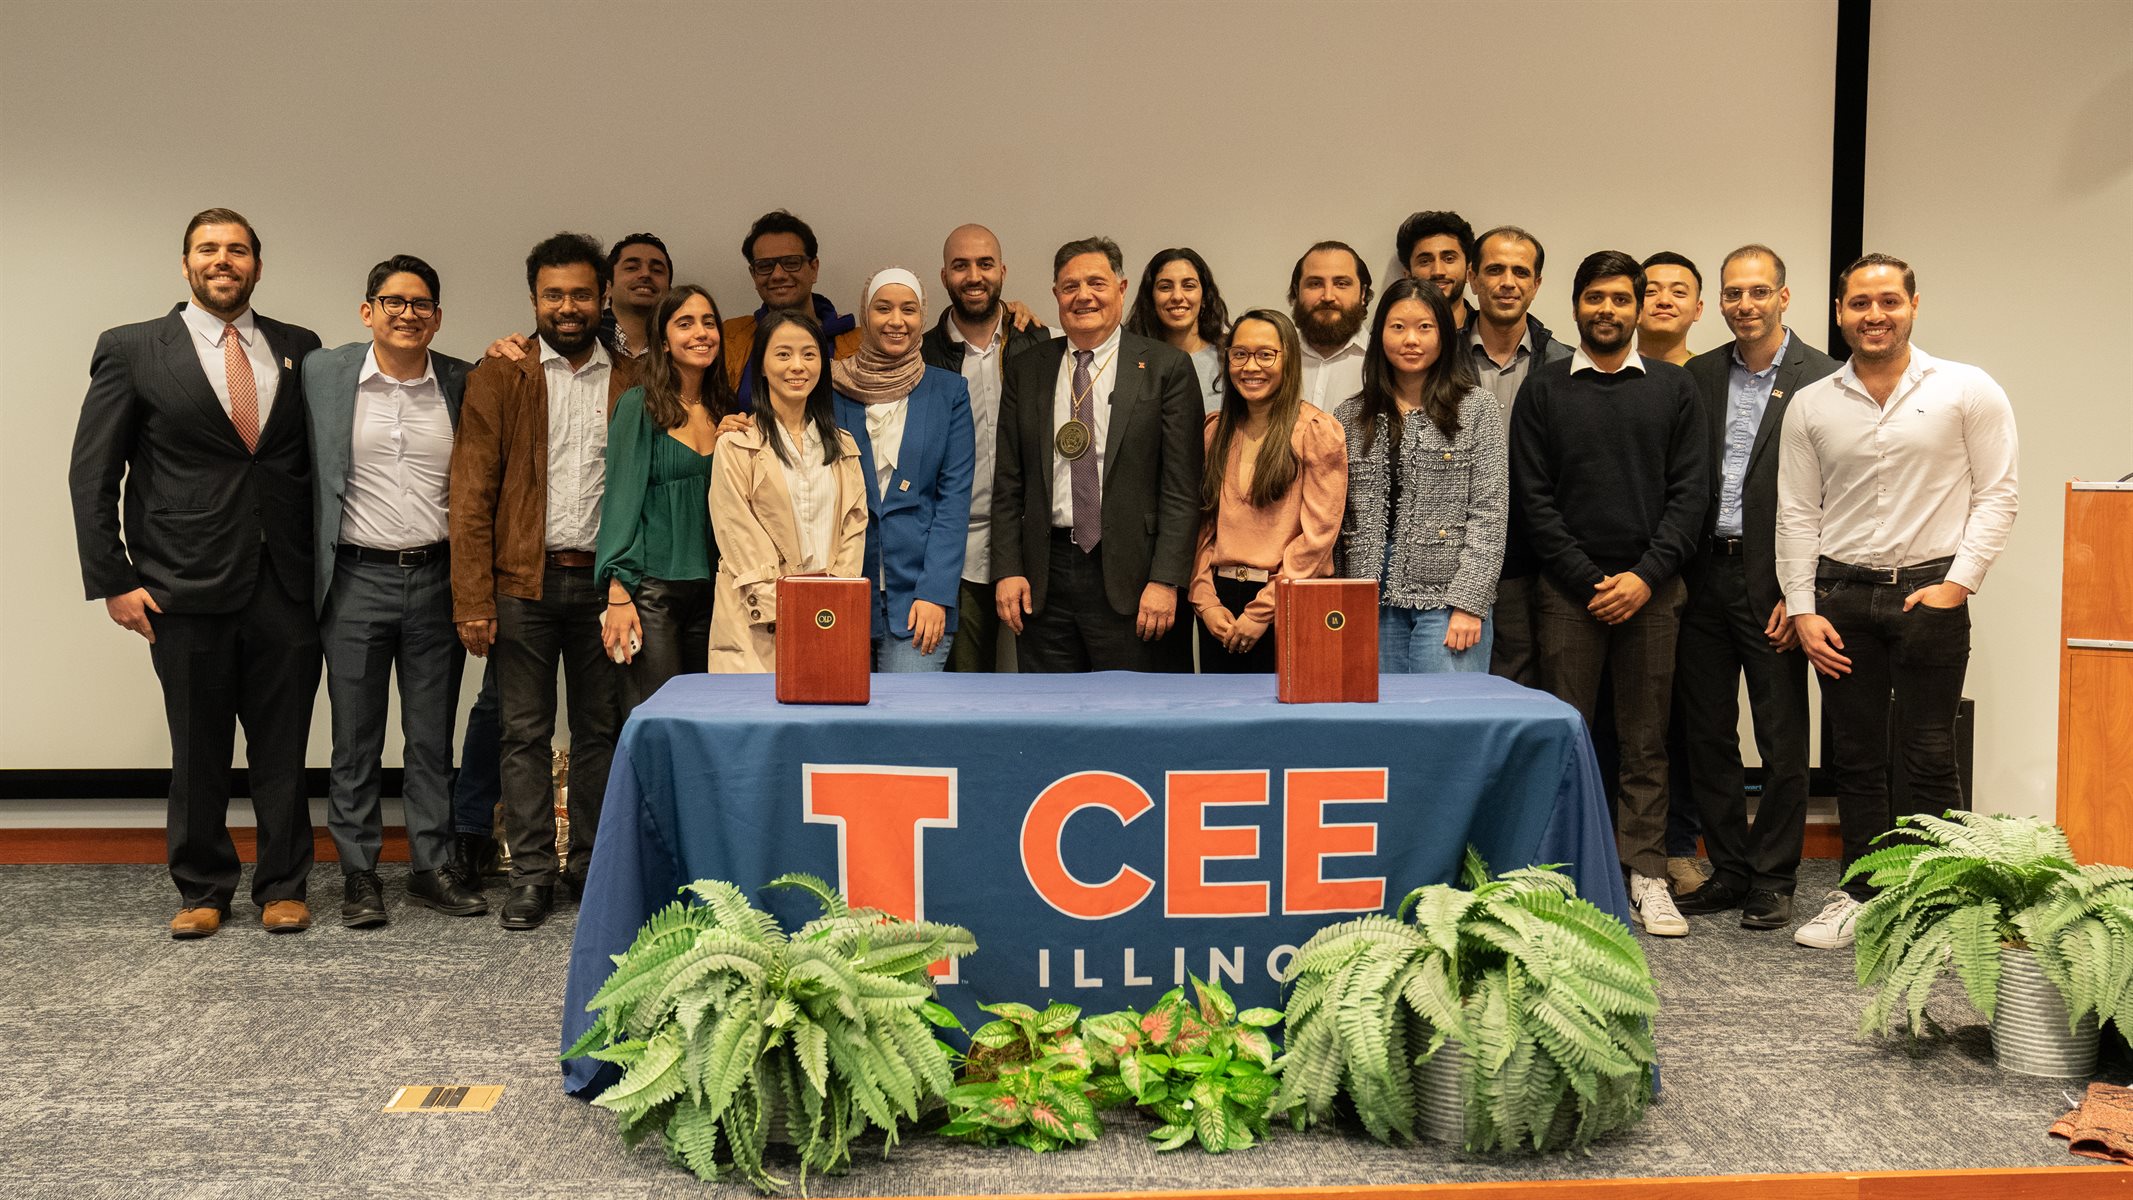 Illinois Center for Transportation students pose with&amp;amp;amp;amp;nbsp;Imad Al-Qadi in the National Center for Supercomputing Applications auditorium.